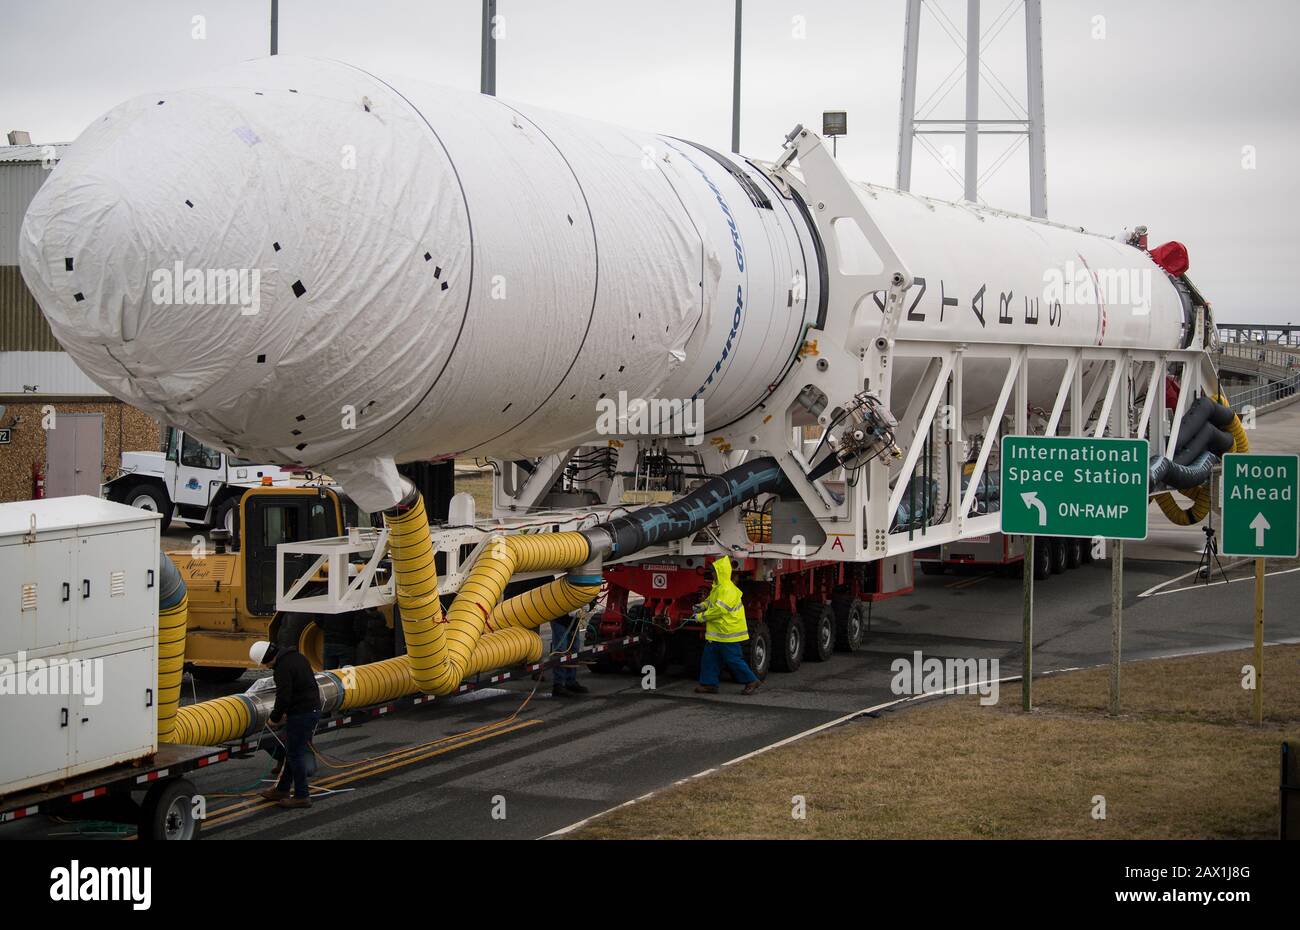 The Northrop Grumman Antares rocket, with Cygnus resupply spacecraft onboard, is moved to launch Pad-0A, at the NASA Wallops Flight Facility February 5, 2020 in Wallops, Virginia. The commercial cargo resupply mission will carry 7,500 pounds of supplies and equipment to the International Space Station and is scheduled to launch February 9th. Stock Photo